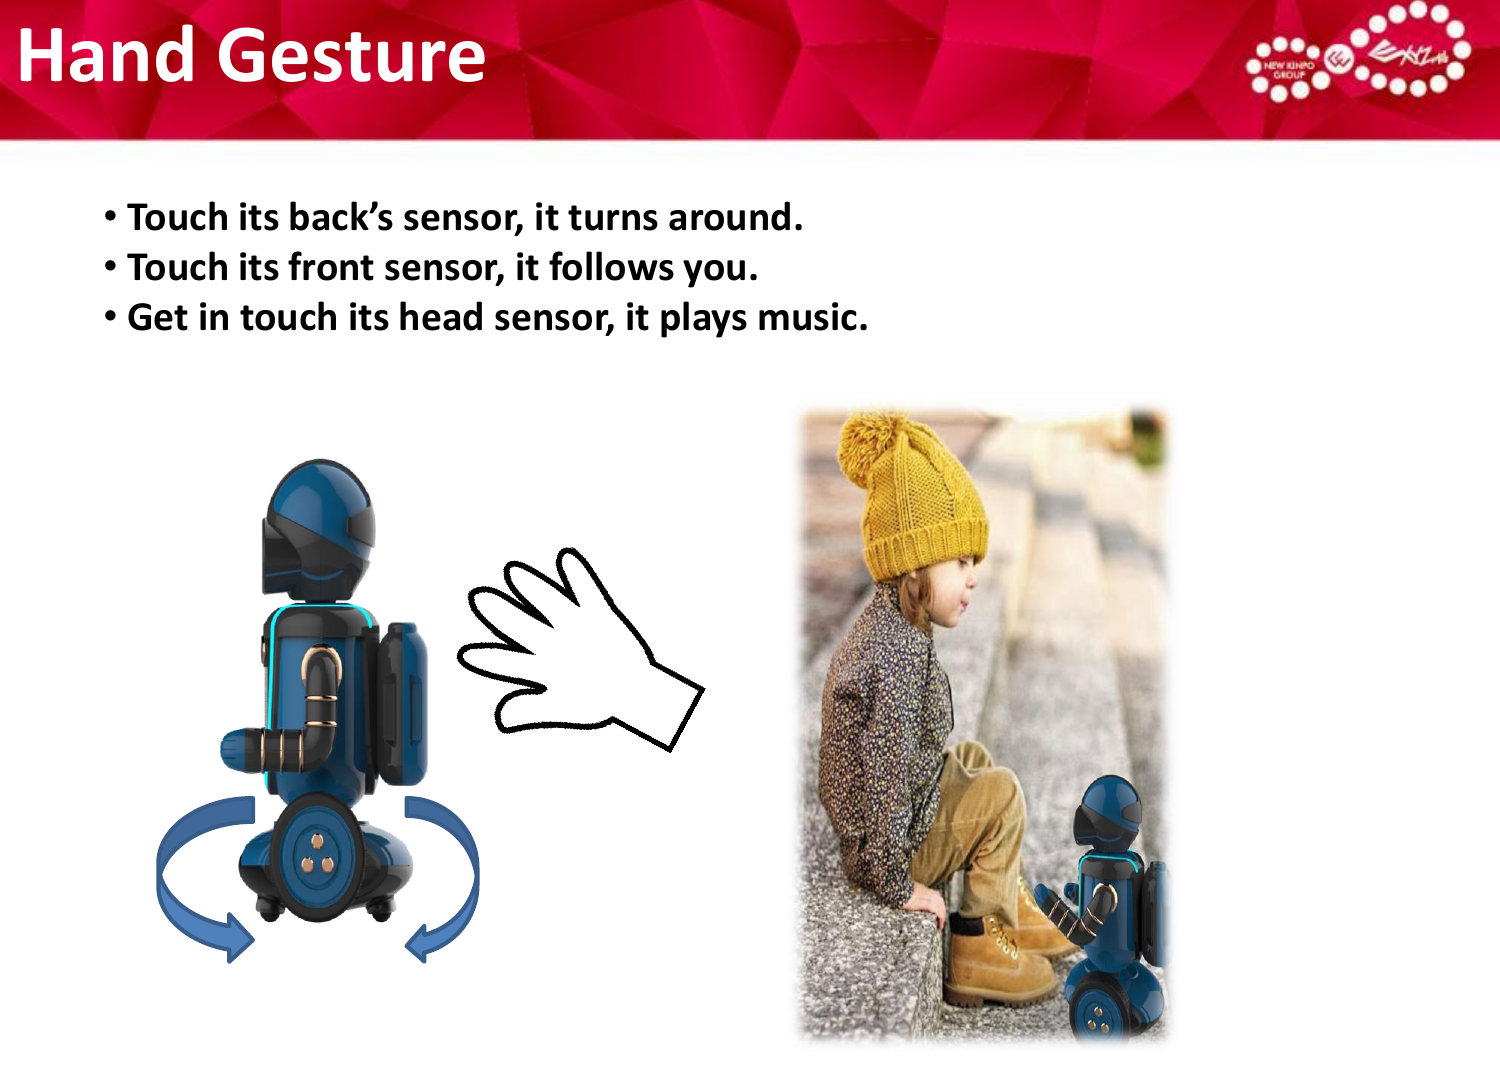 Hand Gesture •Touch its back’s sensor, it turns around.•Touch its front sensor, it follows you.•Get in touch its head sensor, it plays music. 